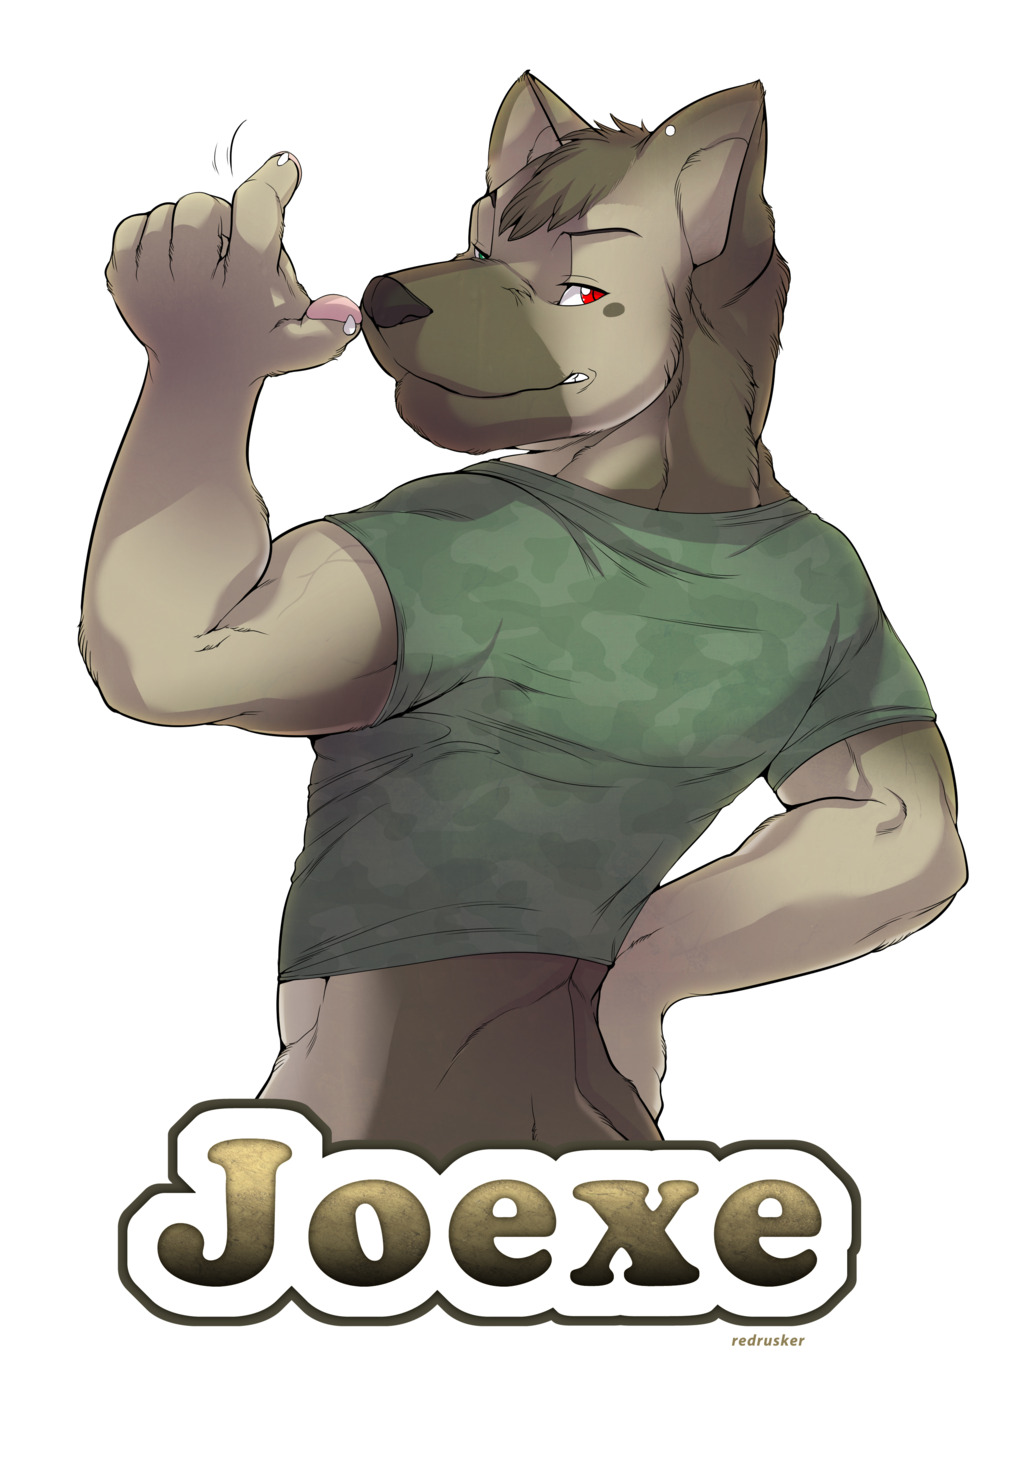 Most recent image: My badge